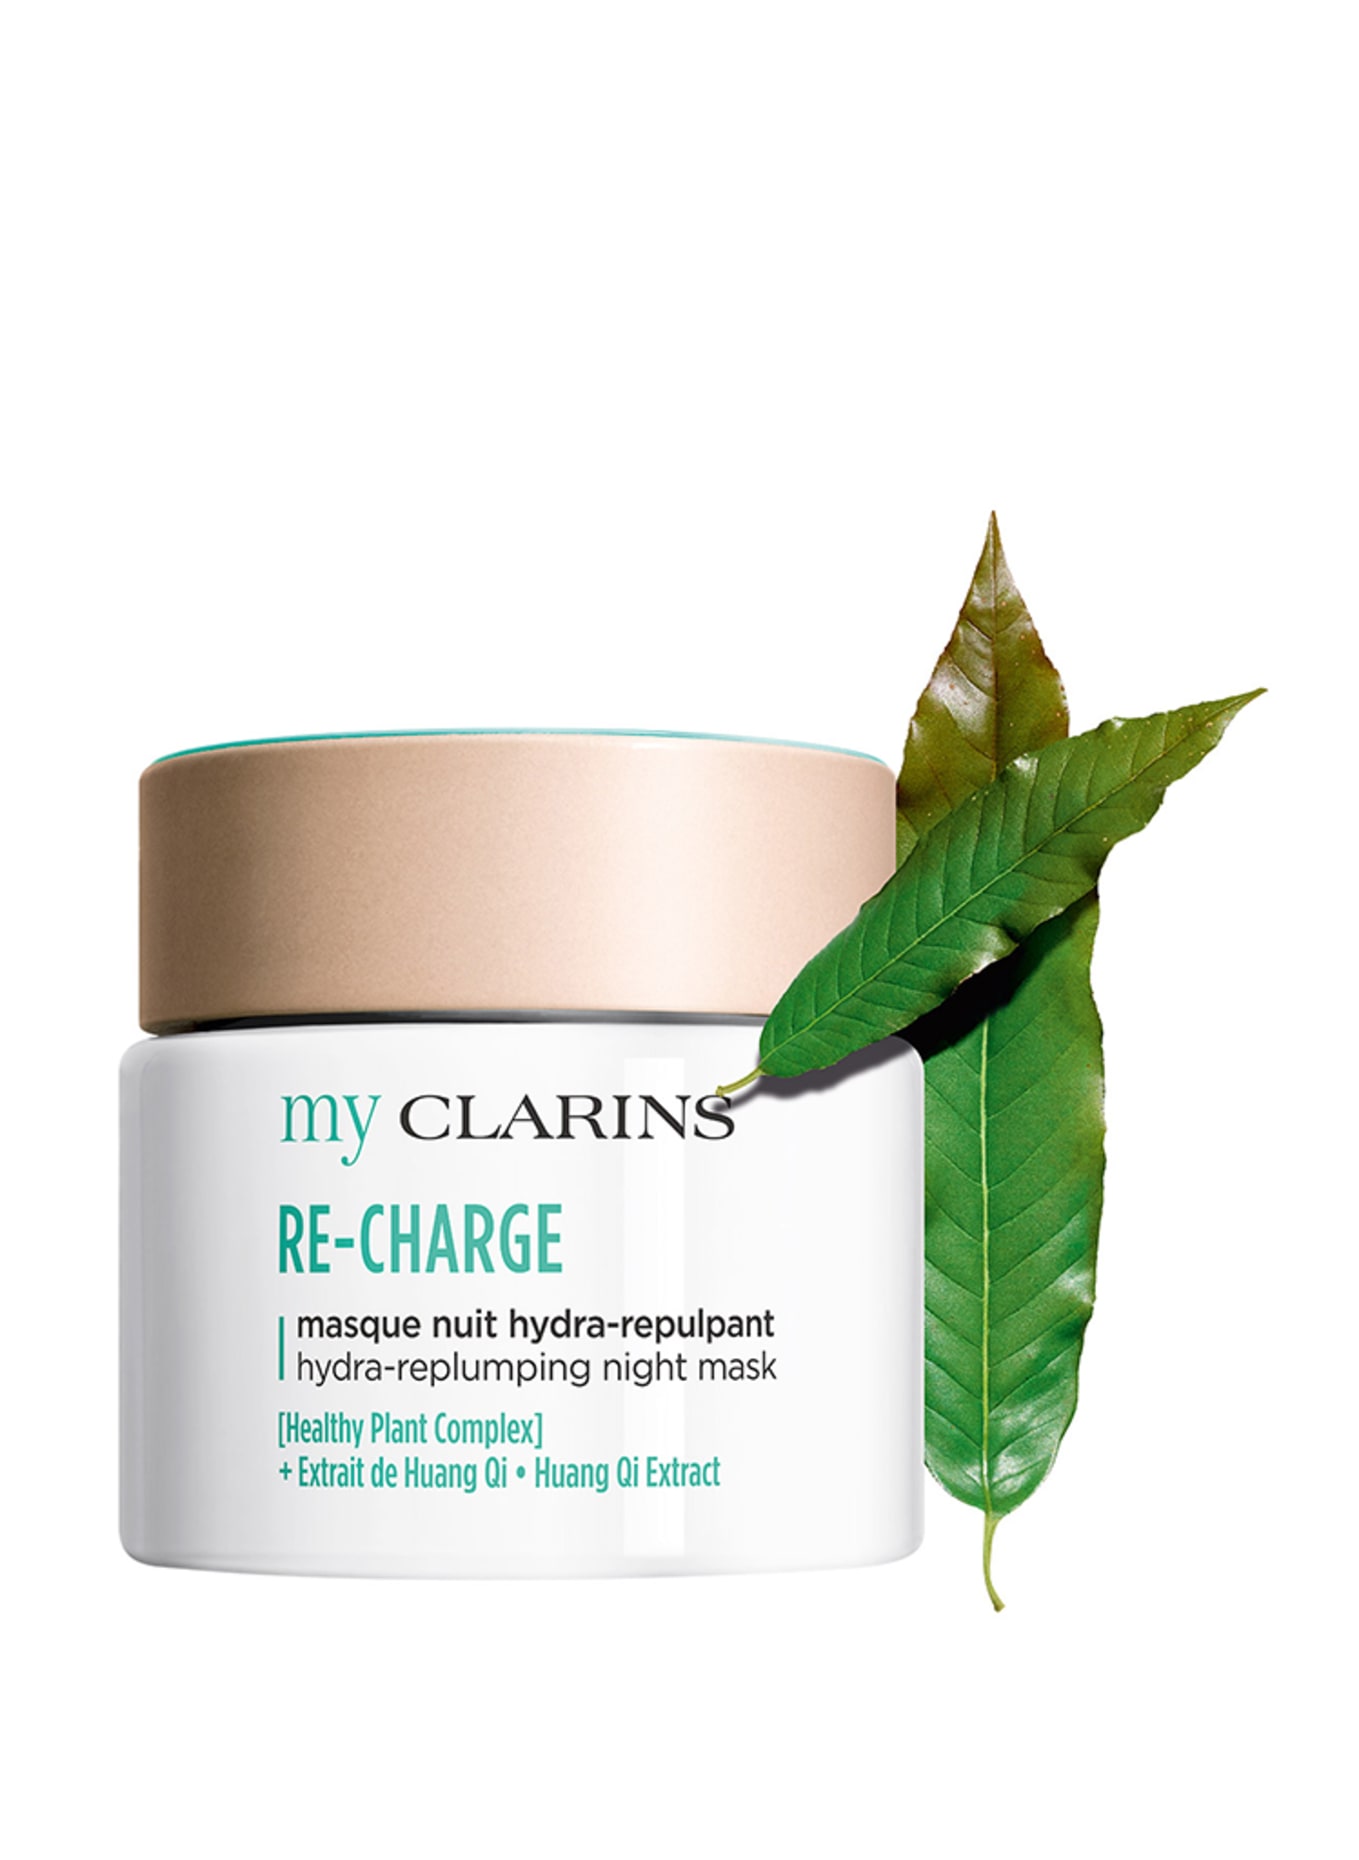 CLARINS RE-CHARGE HYDRA REPLUMPING NIGHT MASK (Obrázek 3)